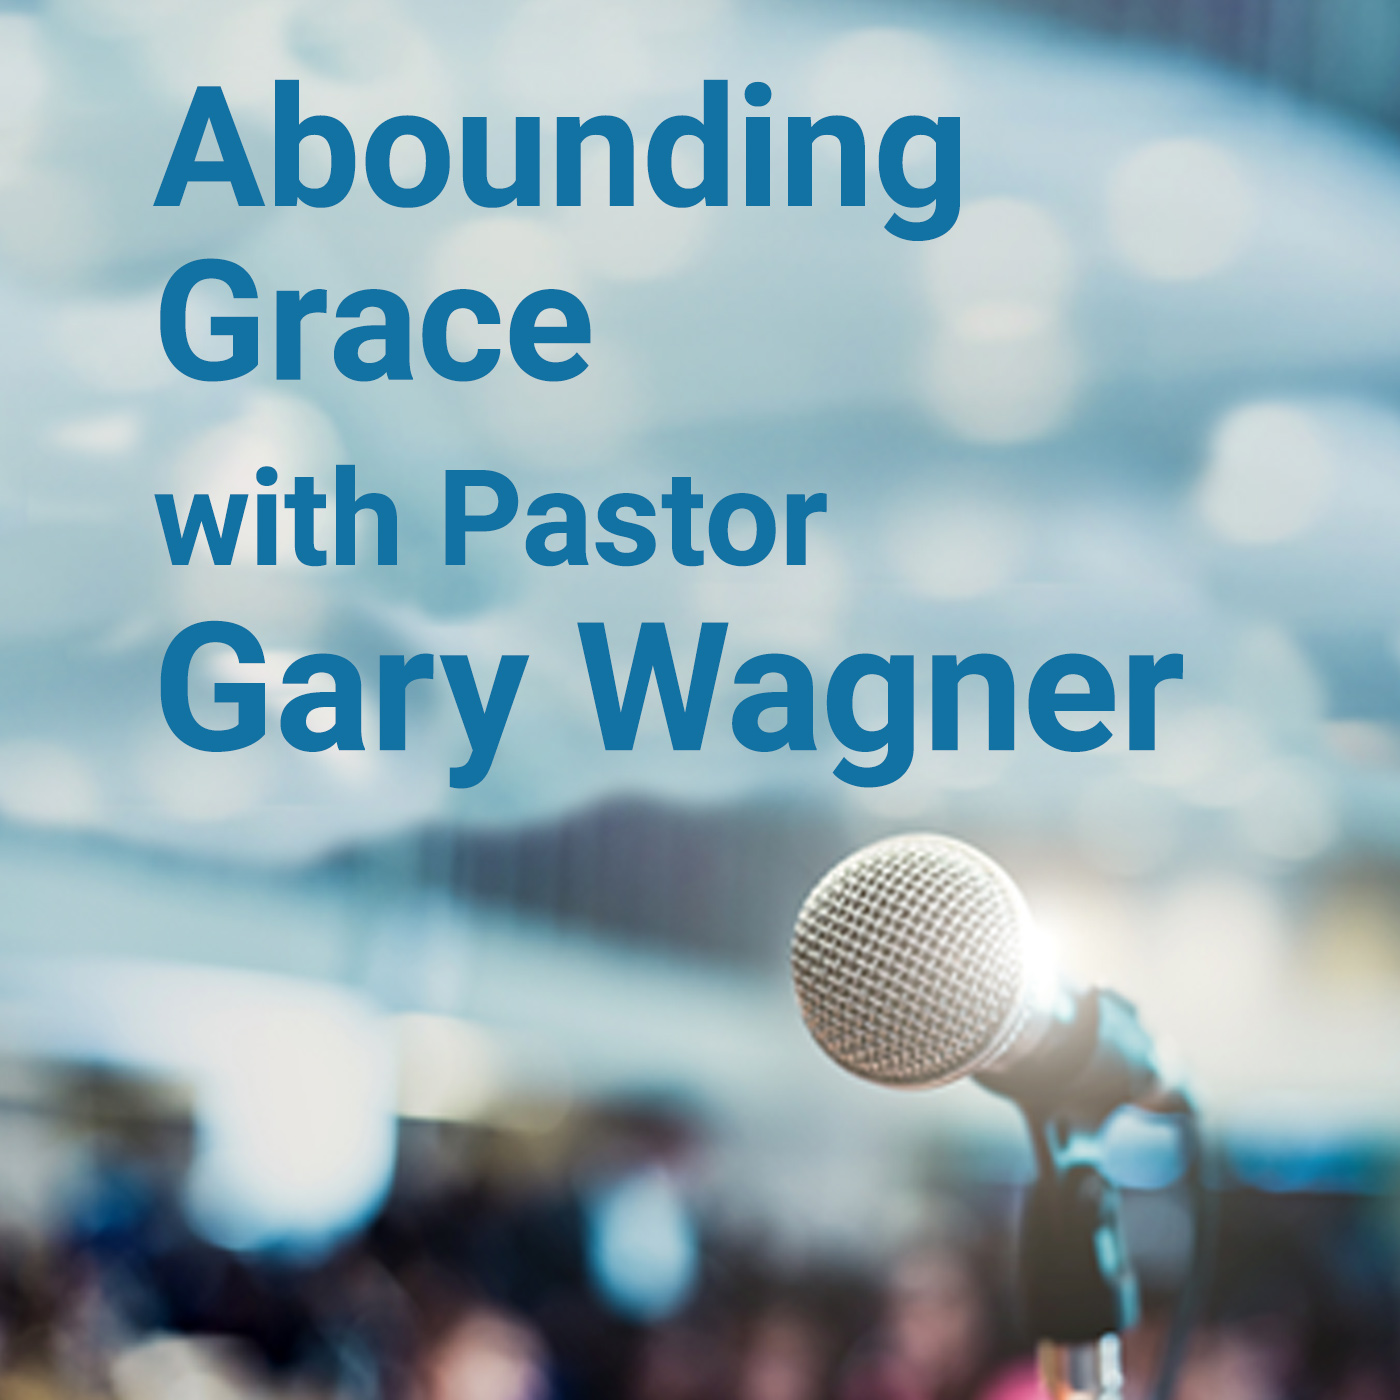 Abounding Grace with Pastor Gary Wagner